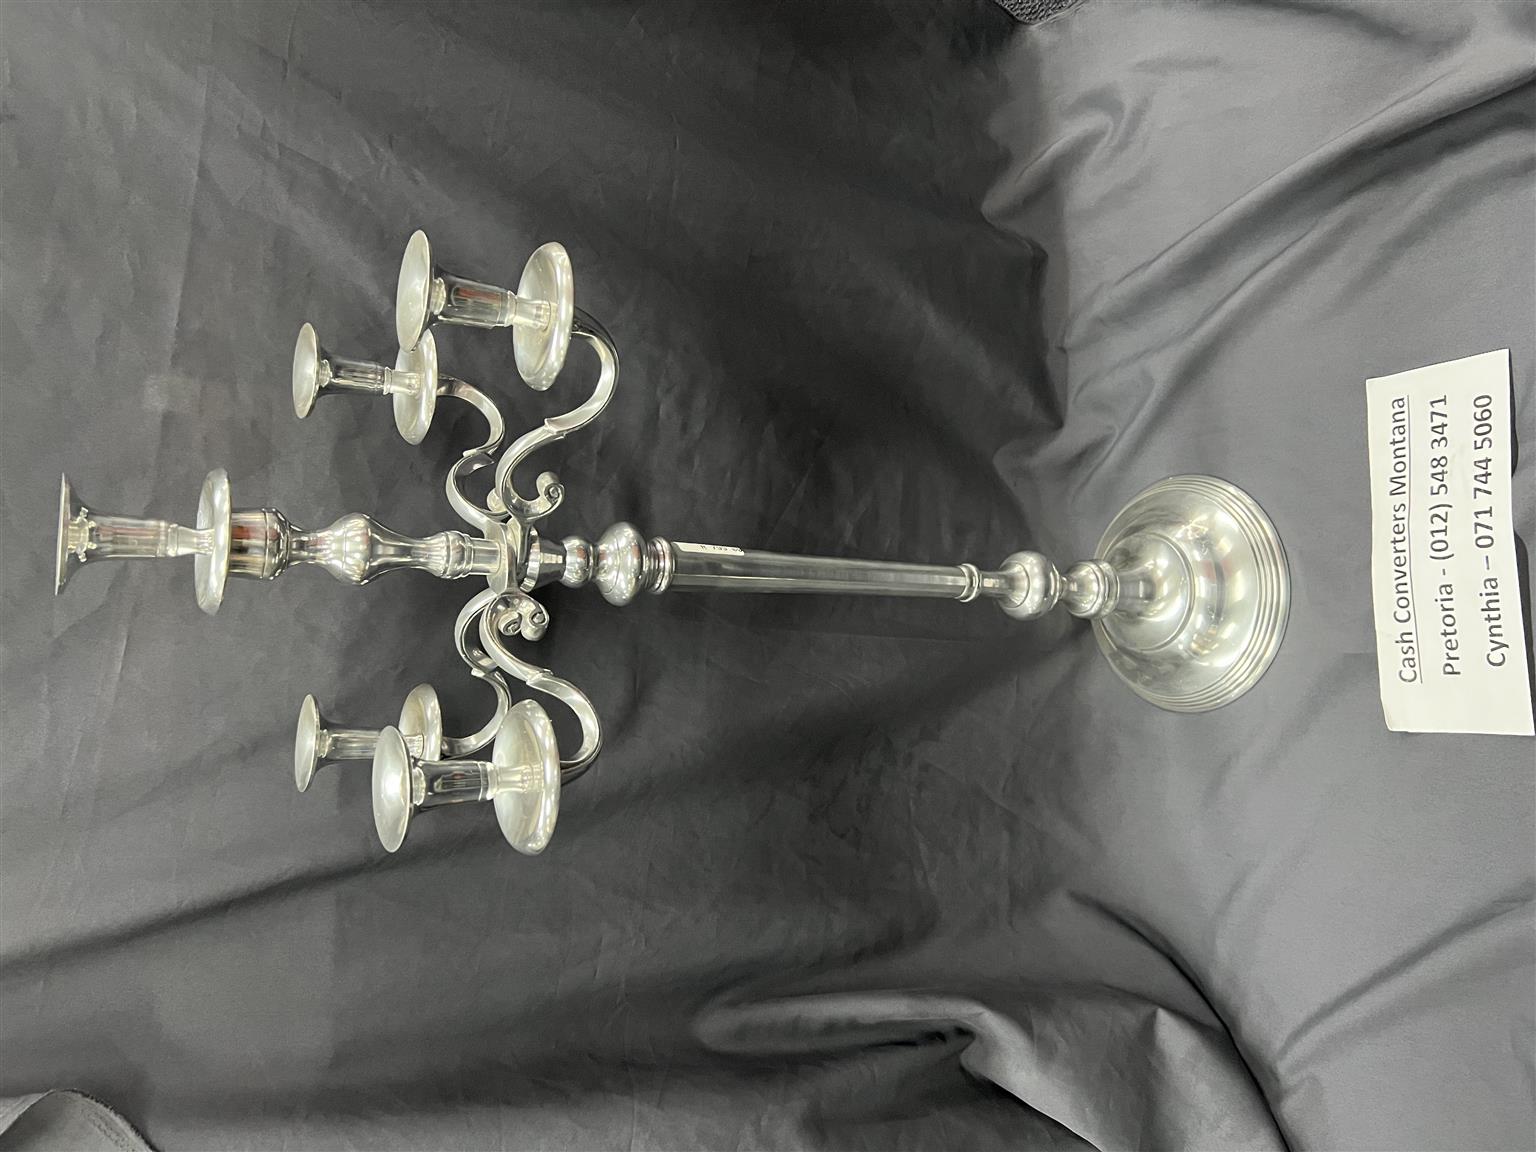 Stainless steel 5 hole candle holder